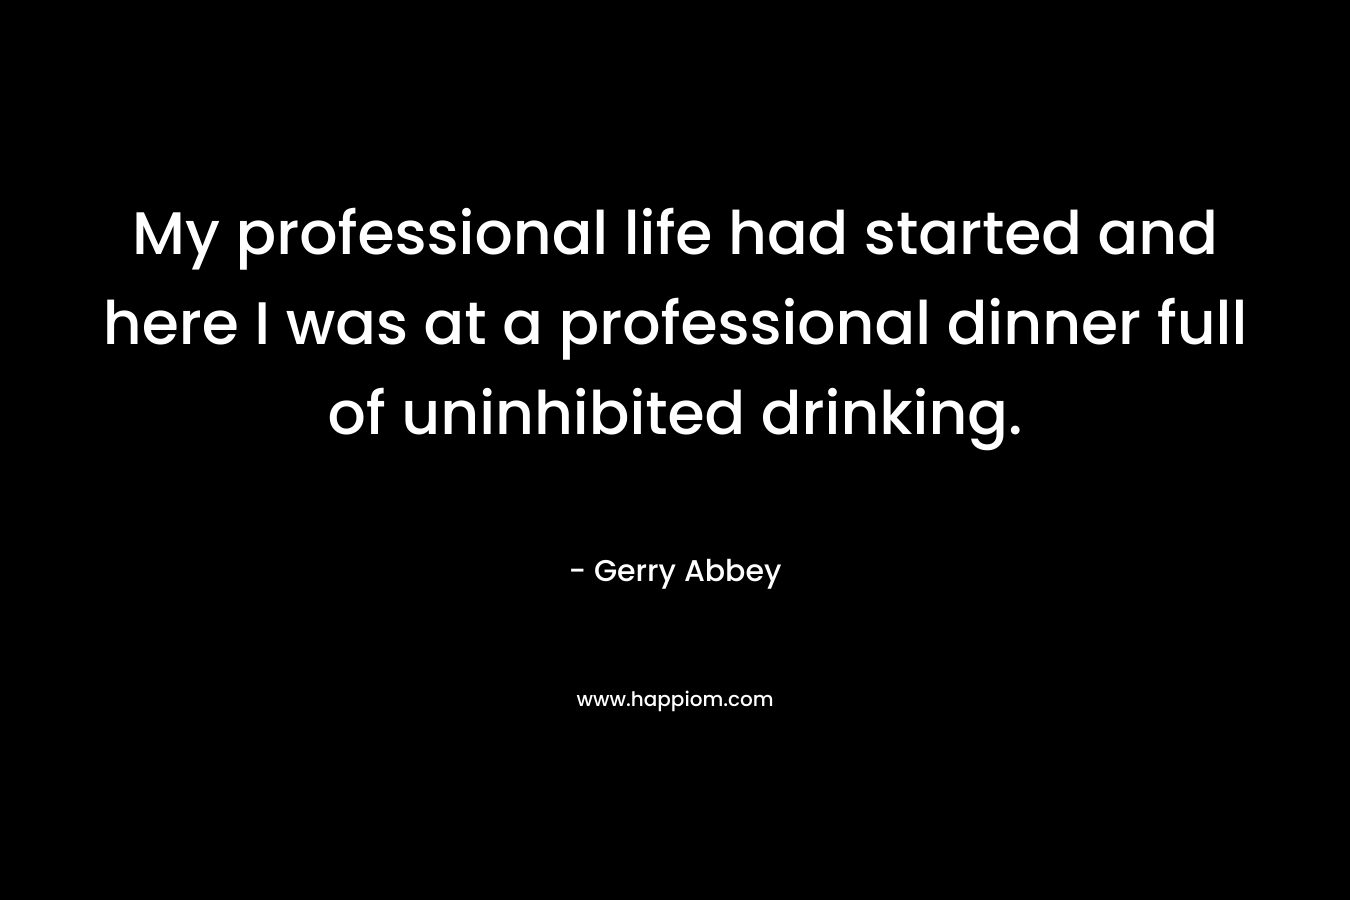 My professional life had started and here I was at a professional dinner full of uninhibited drinking.